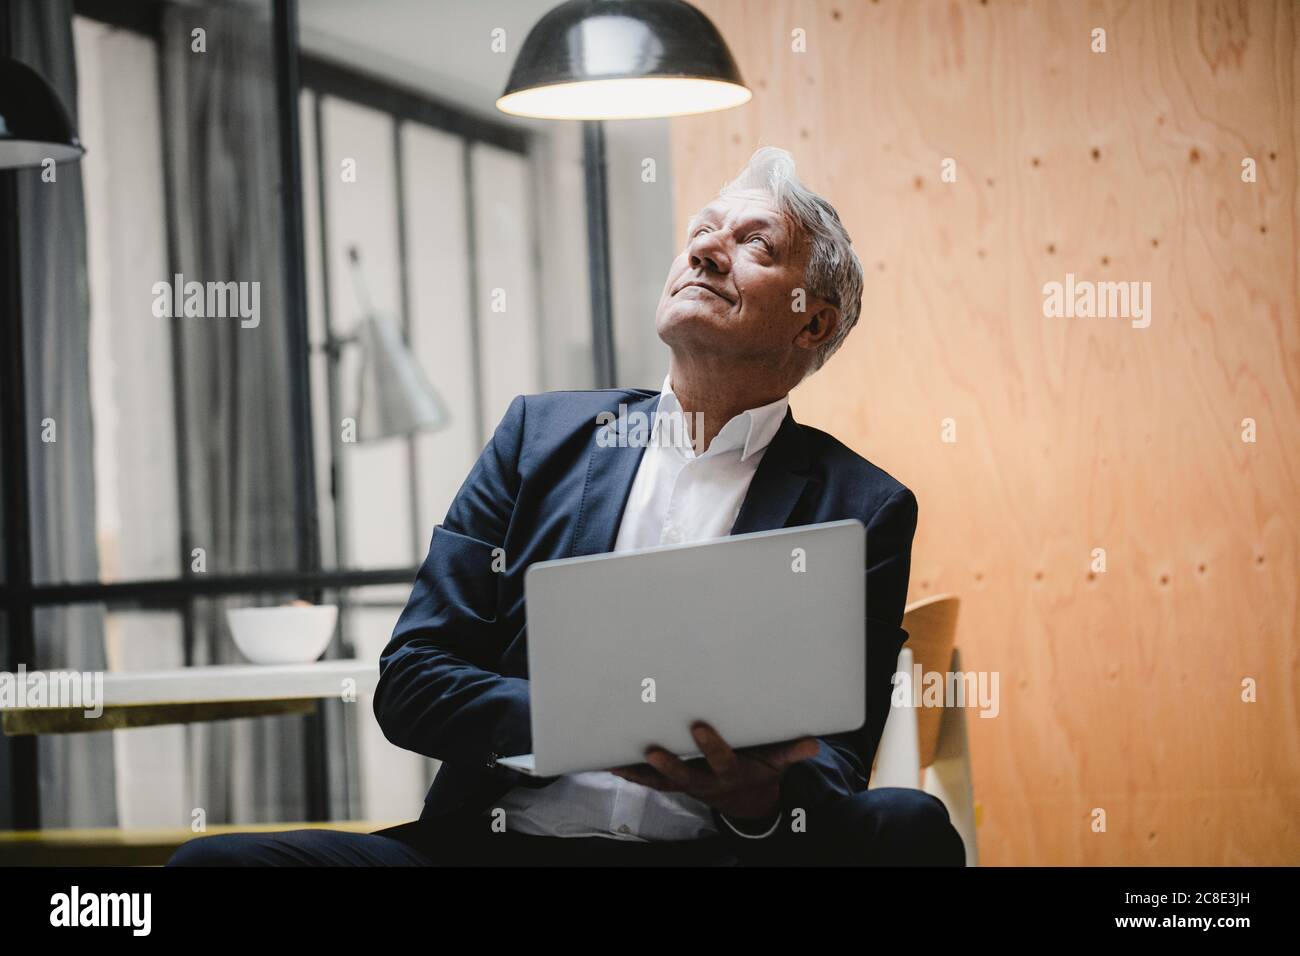 Senior businessman sitting under ceiling lamp, using laptop, looking into the light Stock Photo